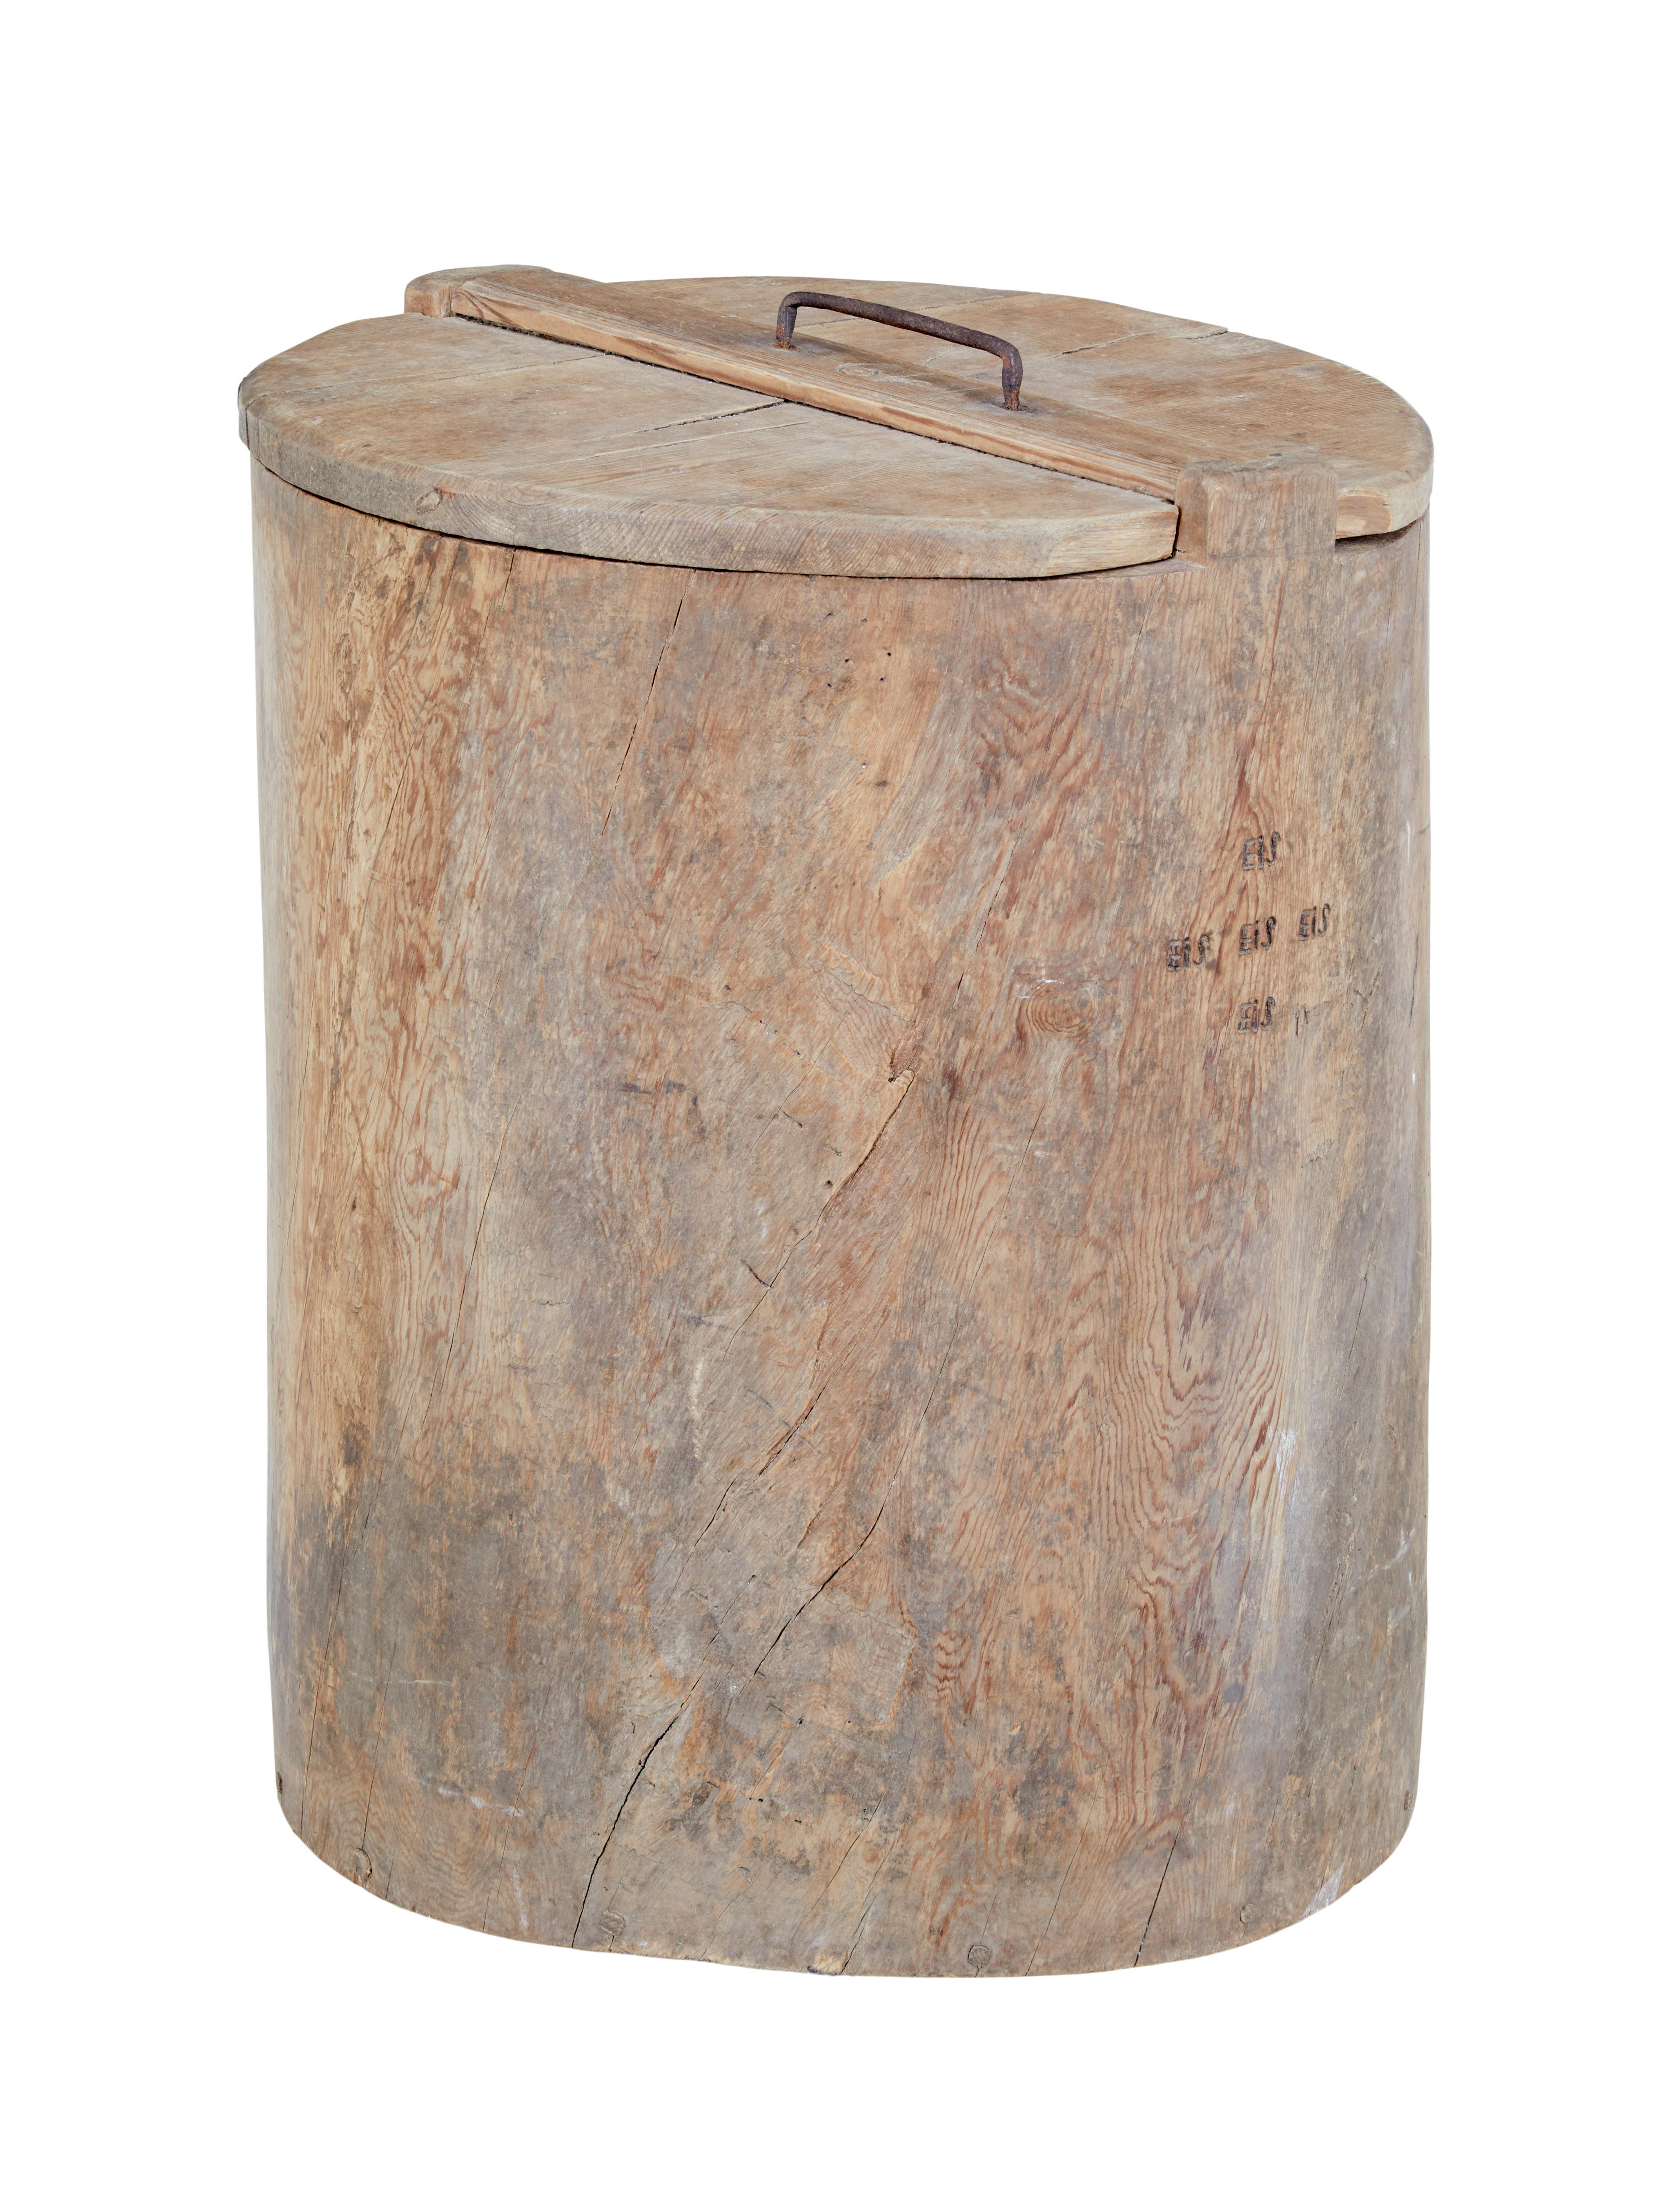 Mid 18th century Swedish pine trunk flour bin circa 1749.

Here we offer a rare mid 18th century flour storage bin, made from using a section of a large pine tree trunk, which has been hollowed out to provide space for storage. Original lid which